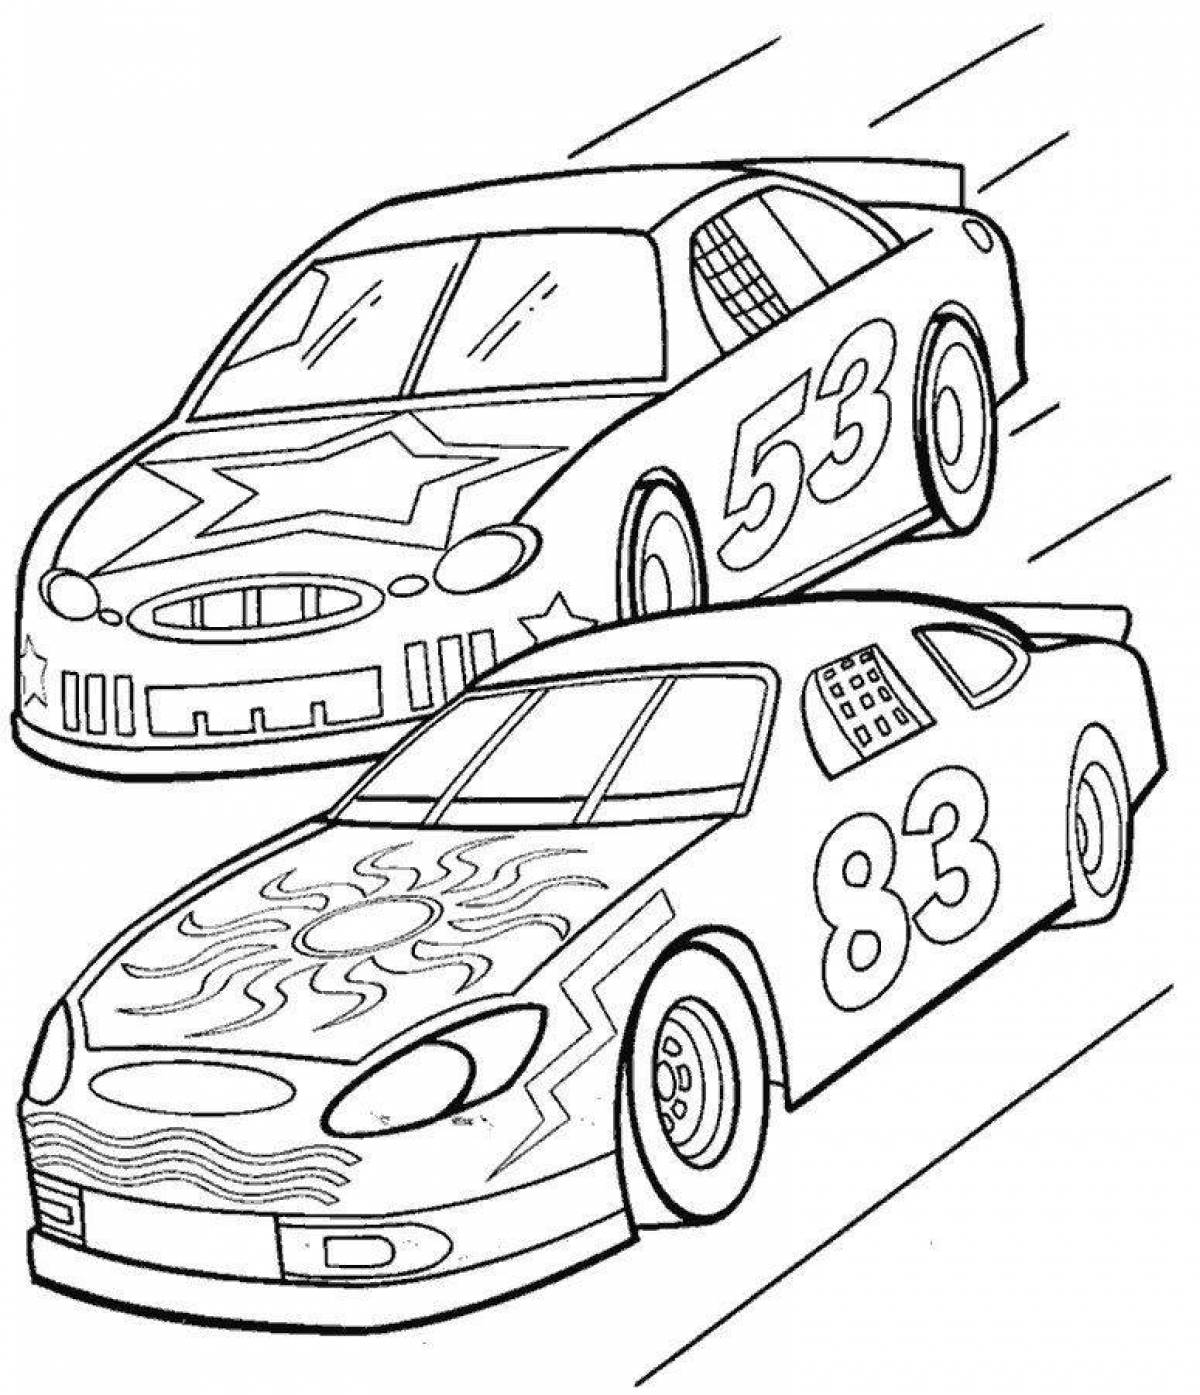 Coloring book adorable cars for boys 6-7 years old